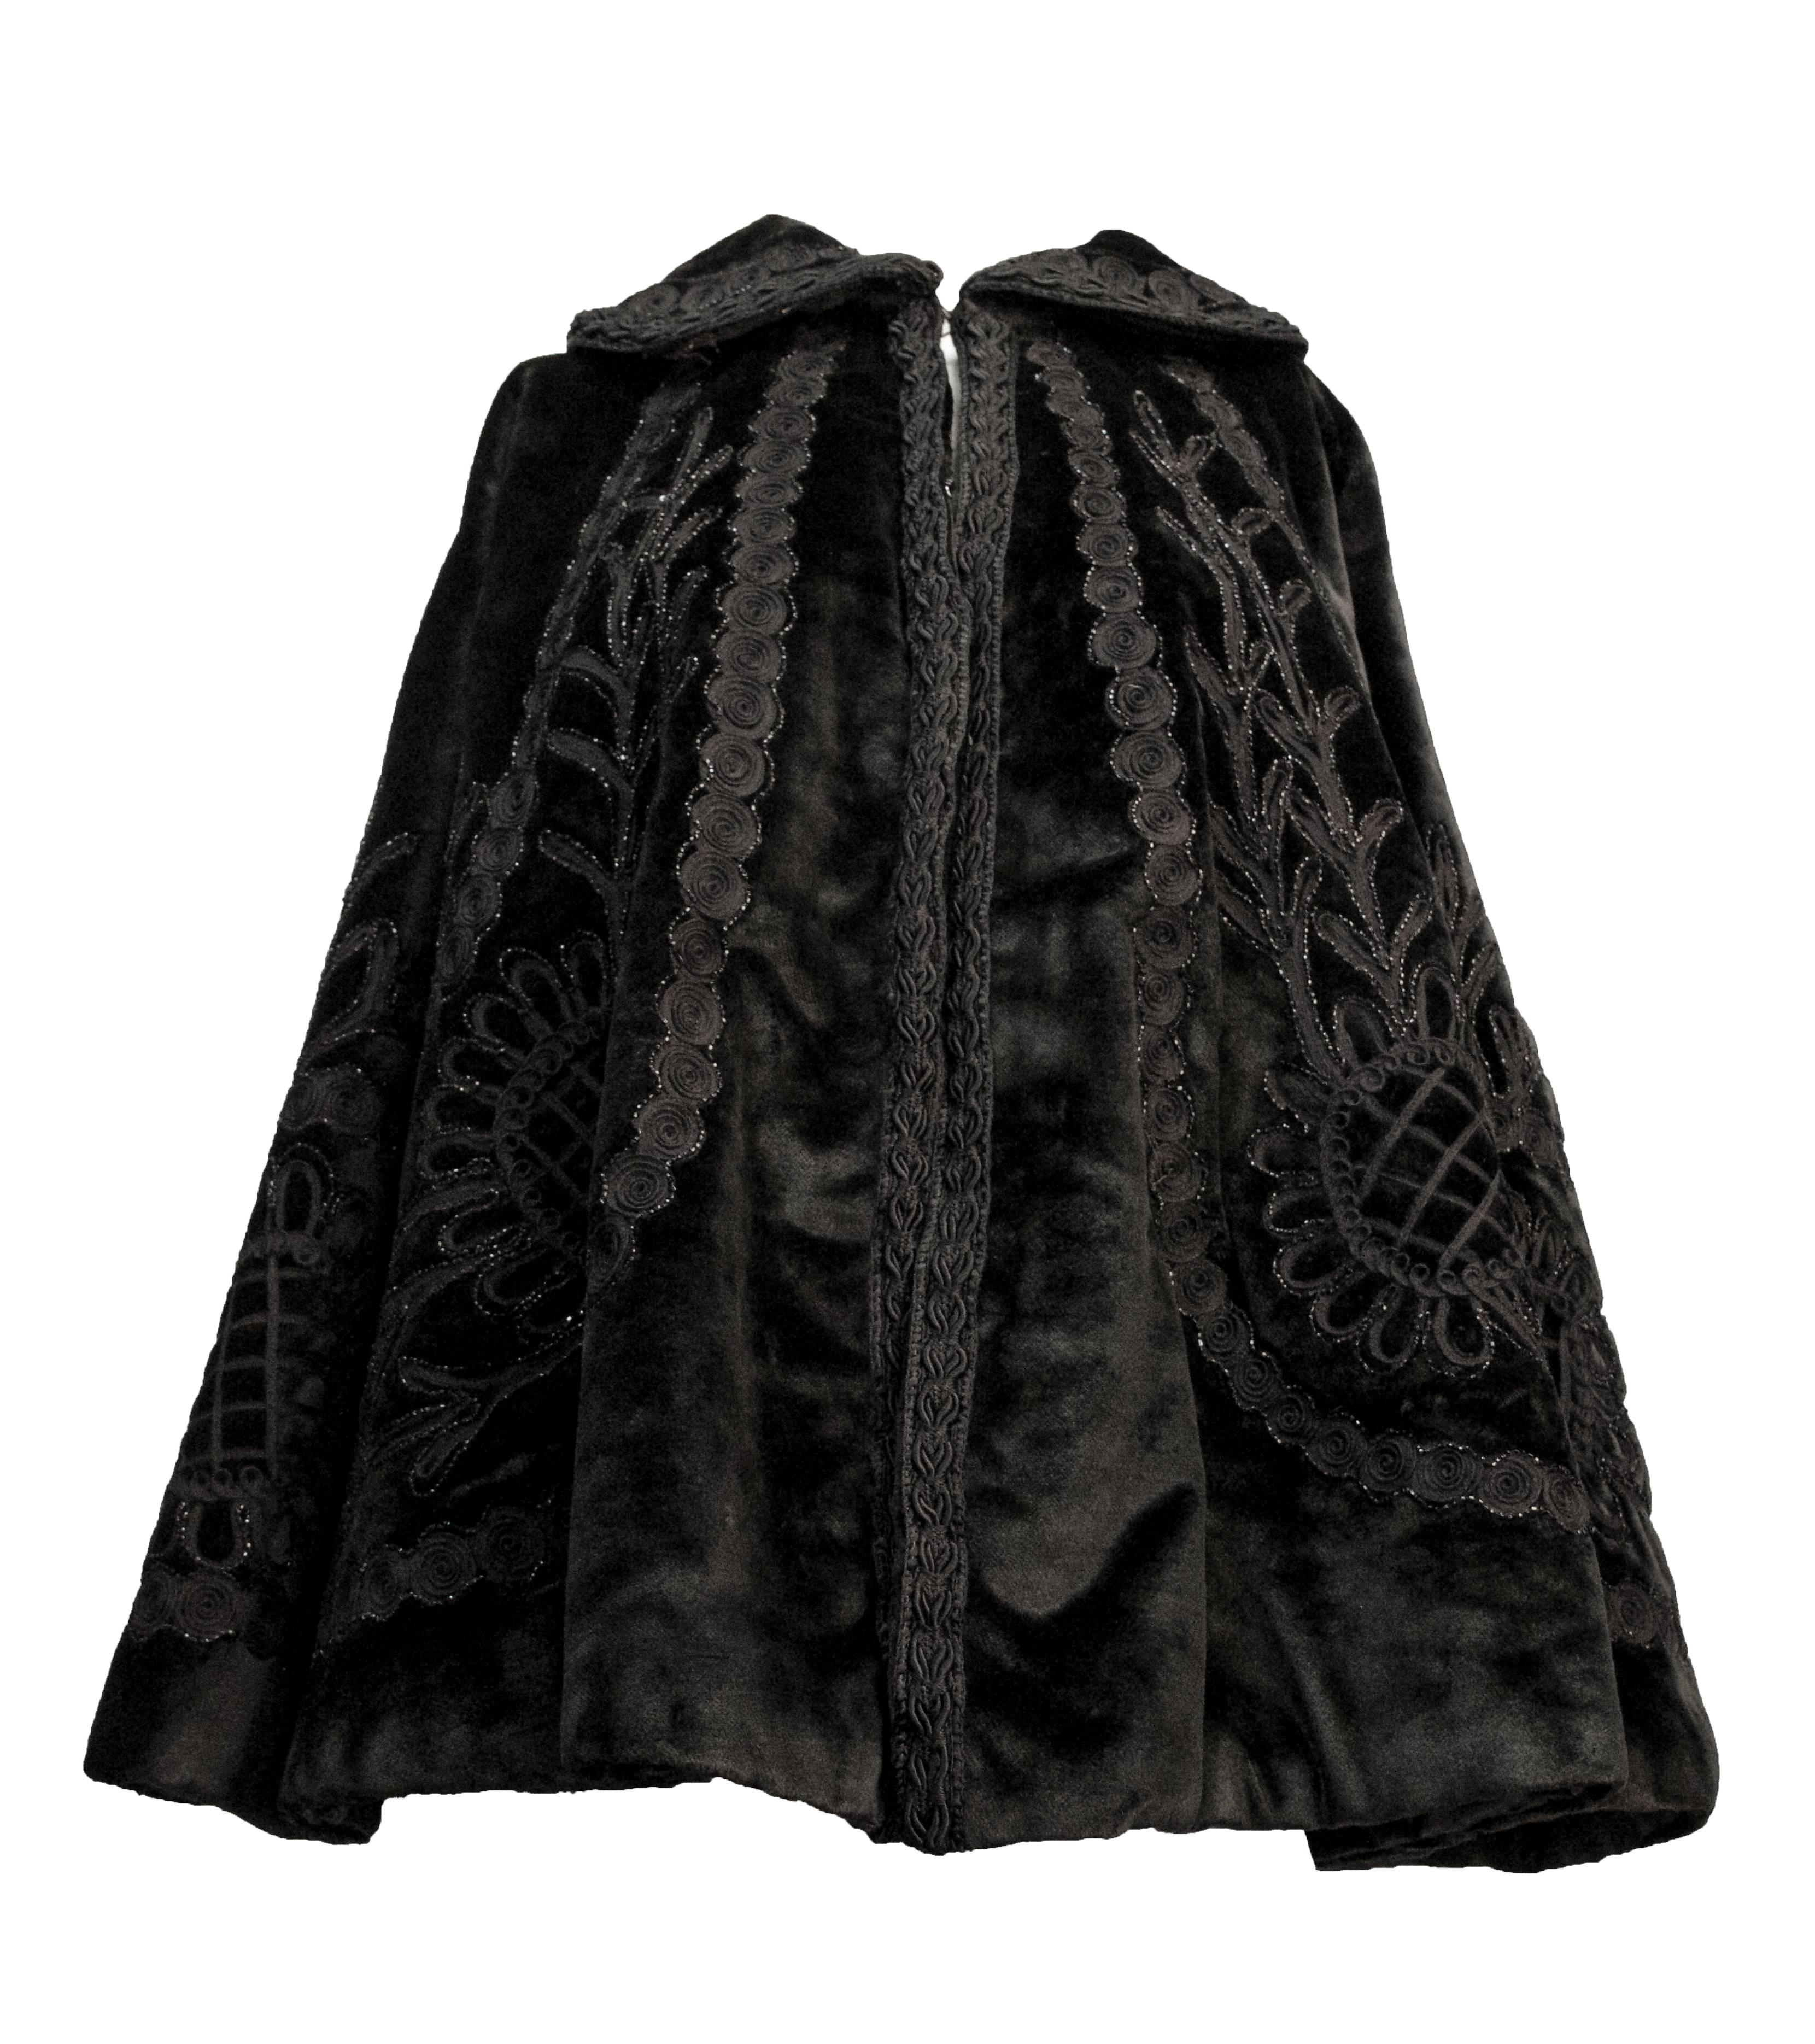 Edwardian black velvet heavily beaded cape. Soutache trim along collar and front opening. Has been beautifully re-lined in black satin. 